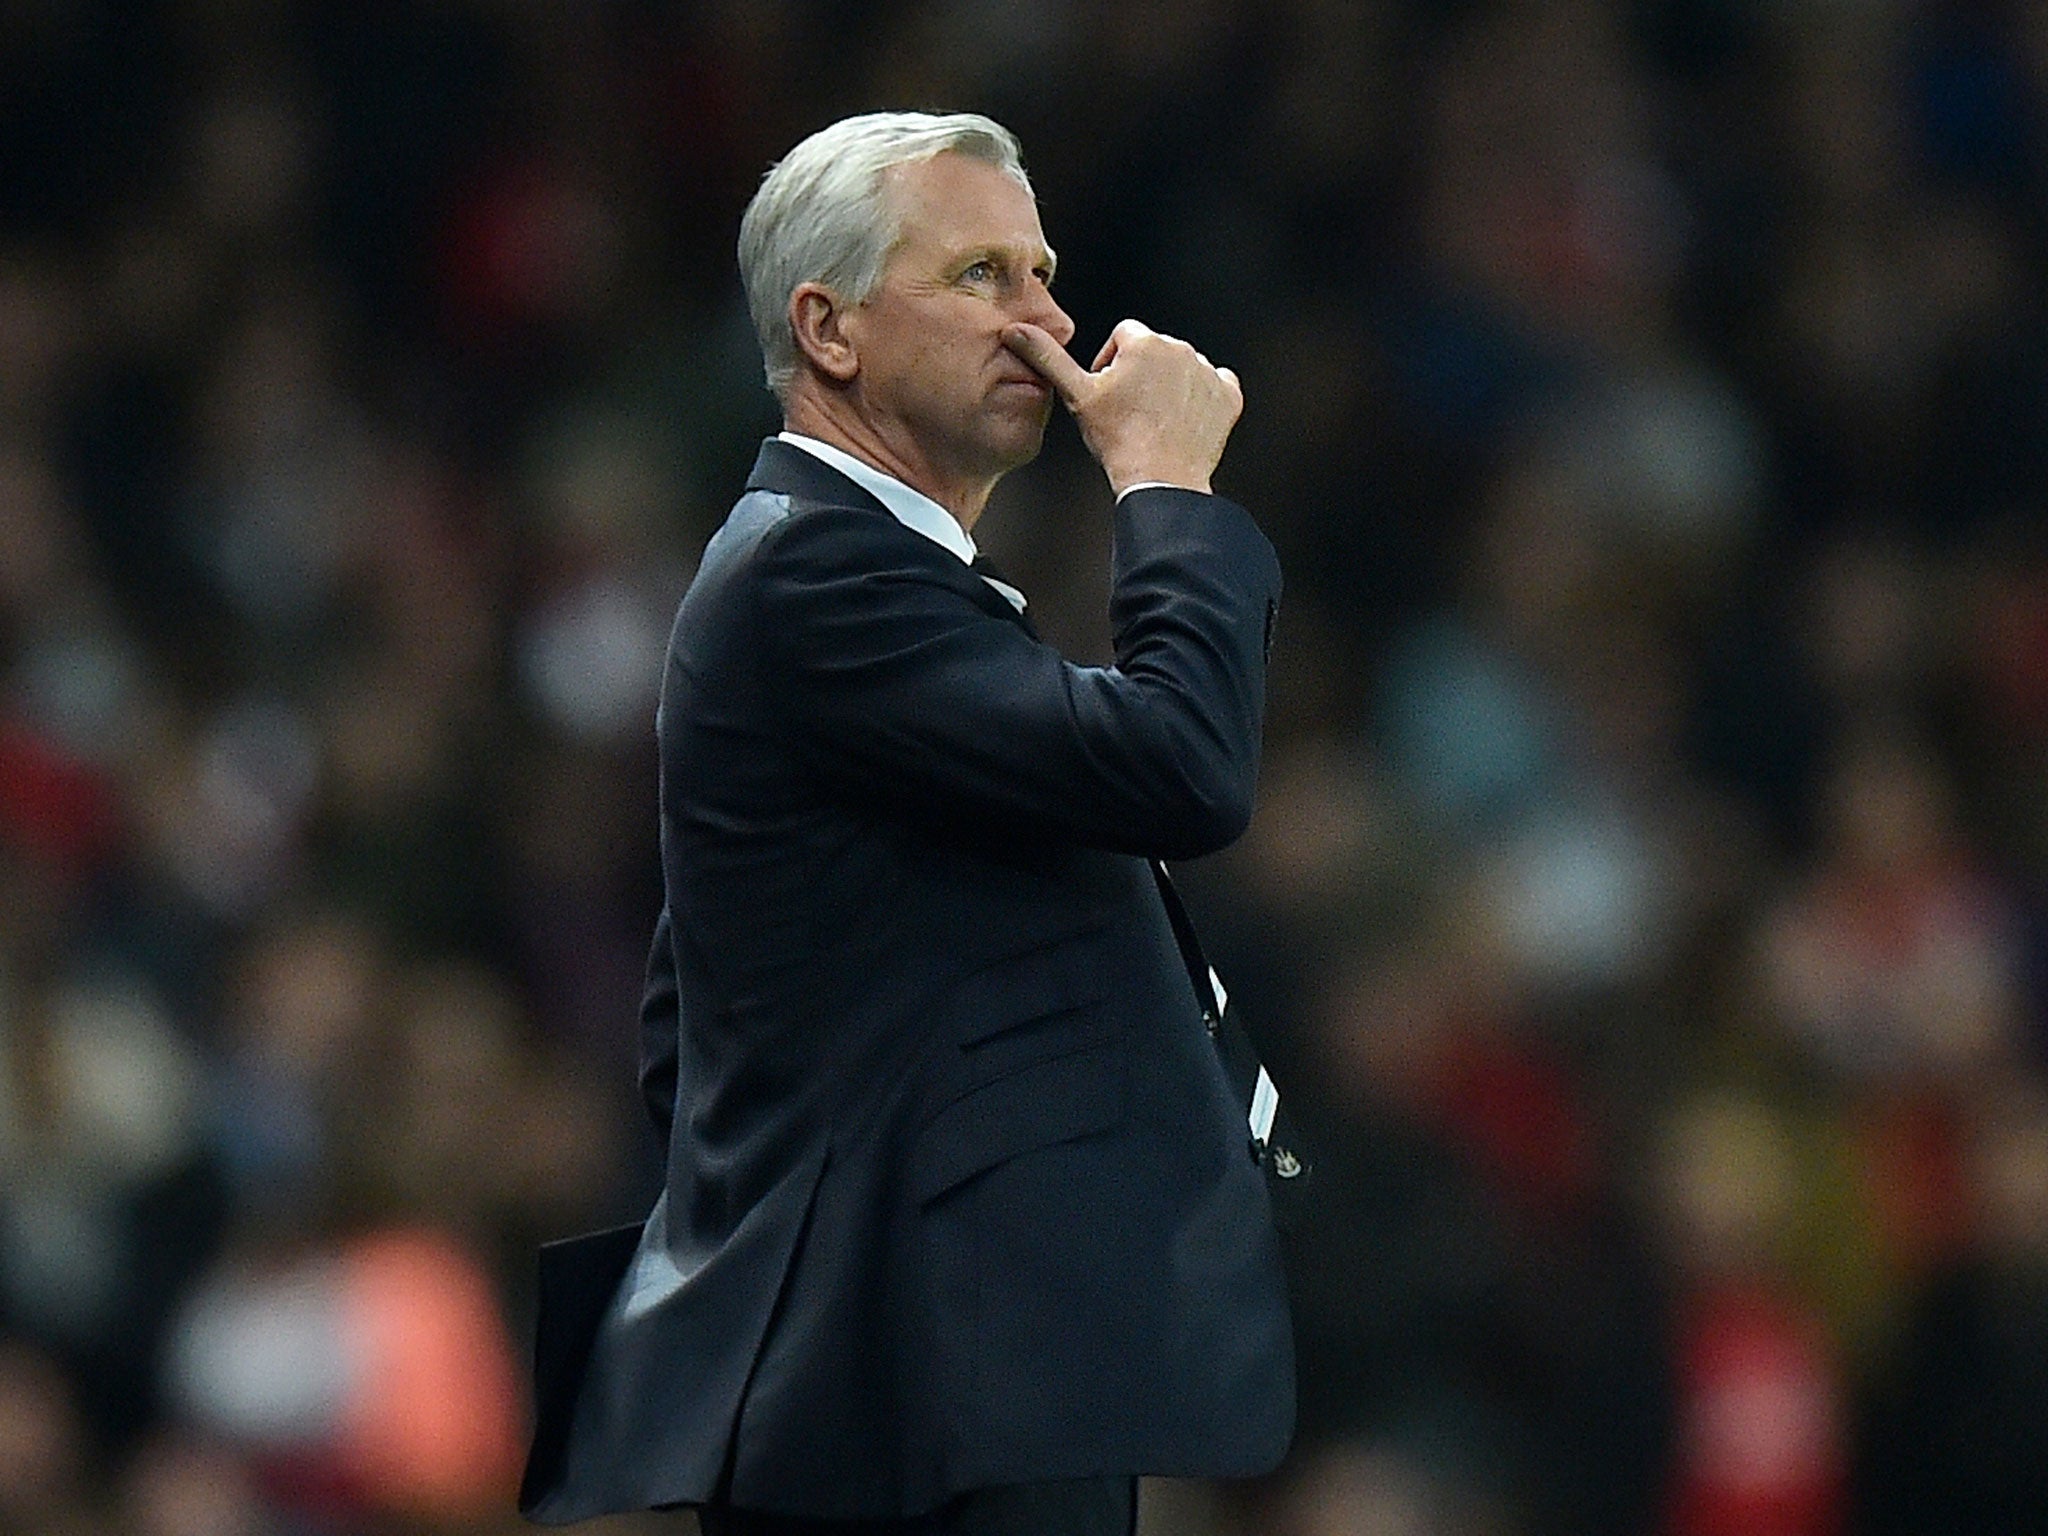 Alan Pardew returned to the touchline for the first time after a seven-match ban